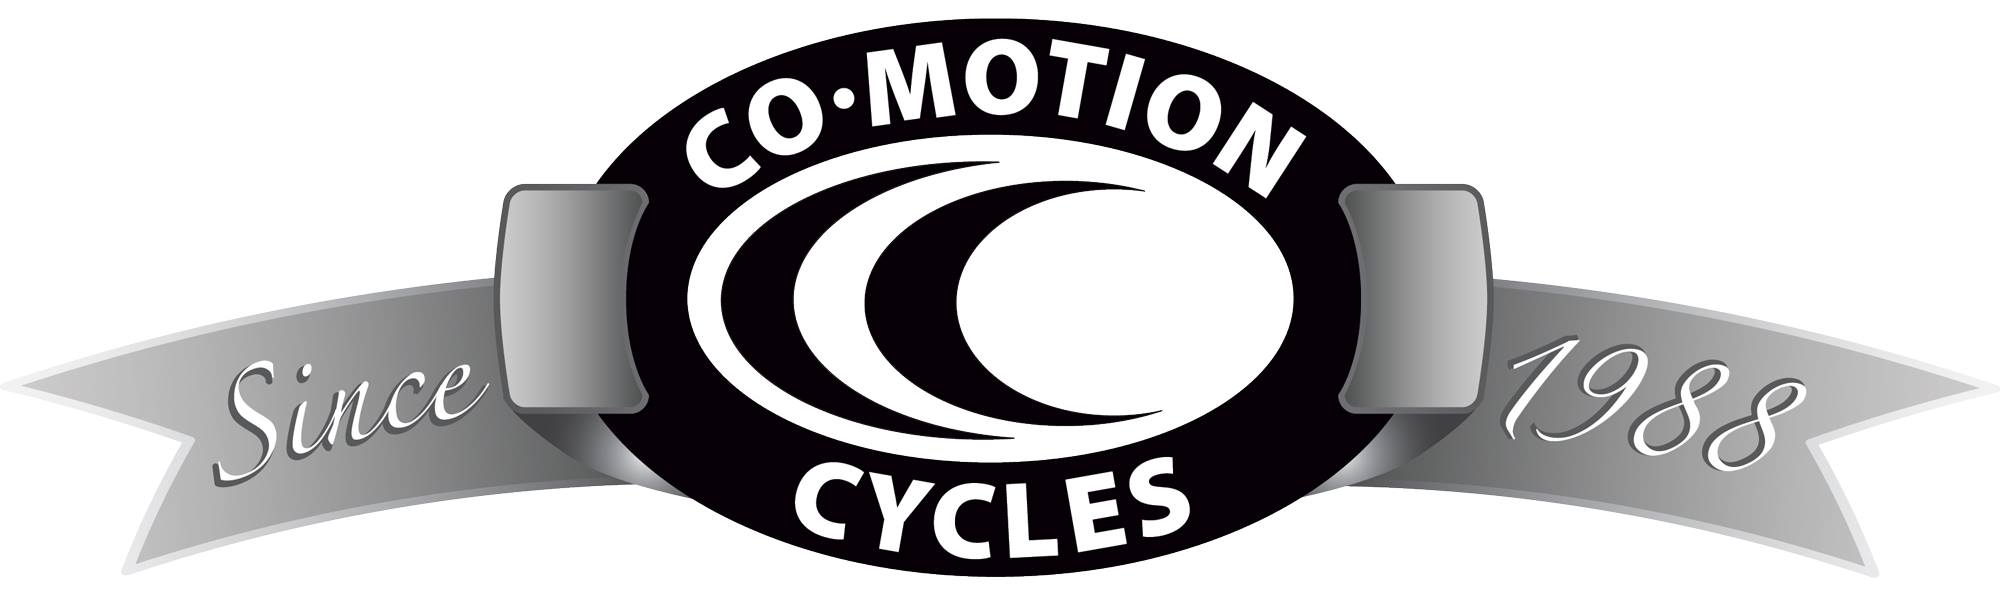 Co-Motion Cycles - Buy American Campaign